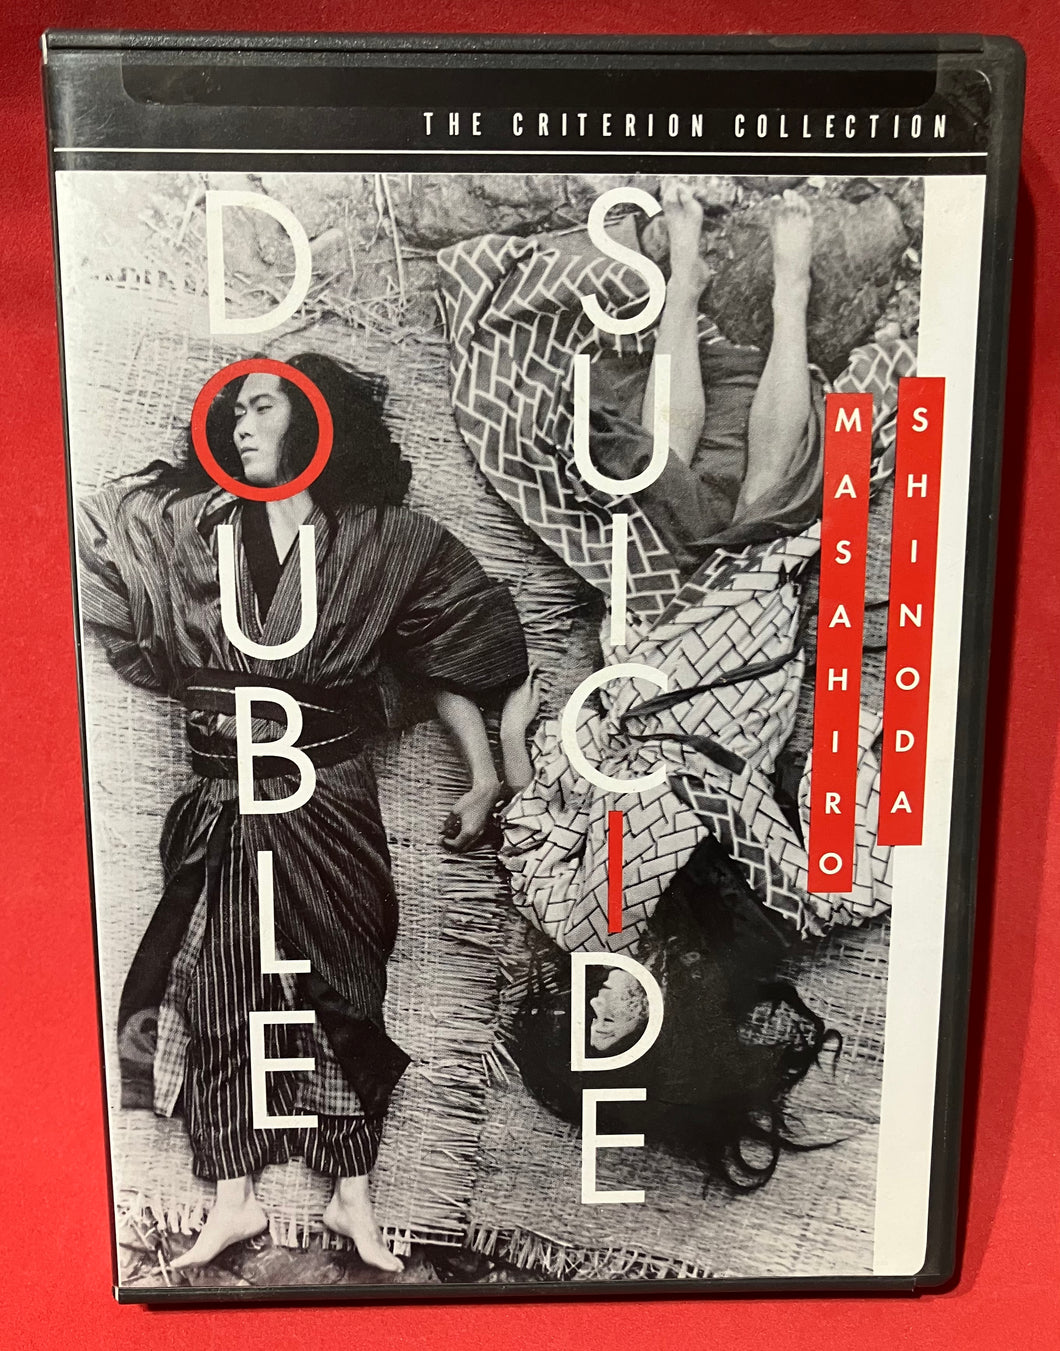 DOUBLE SUICIDE - CRITERION COLLECTION - DVD (SECOND HAND)